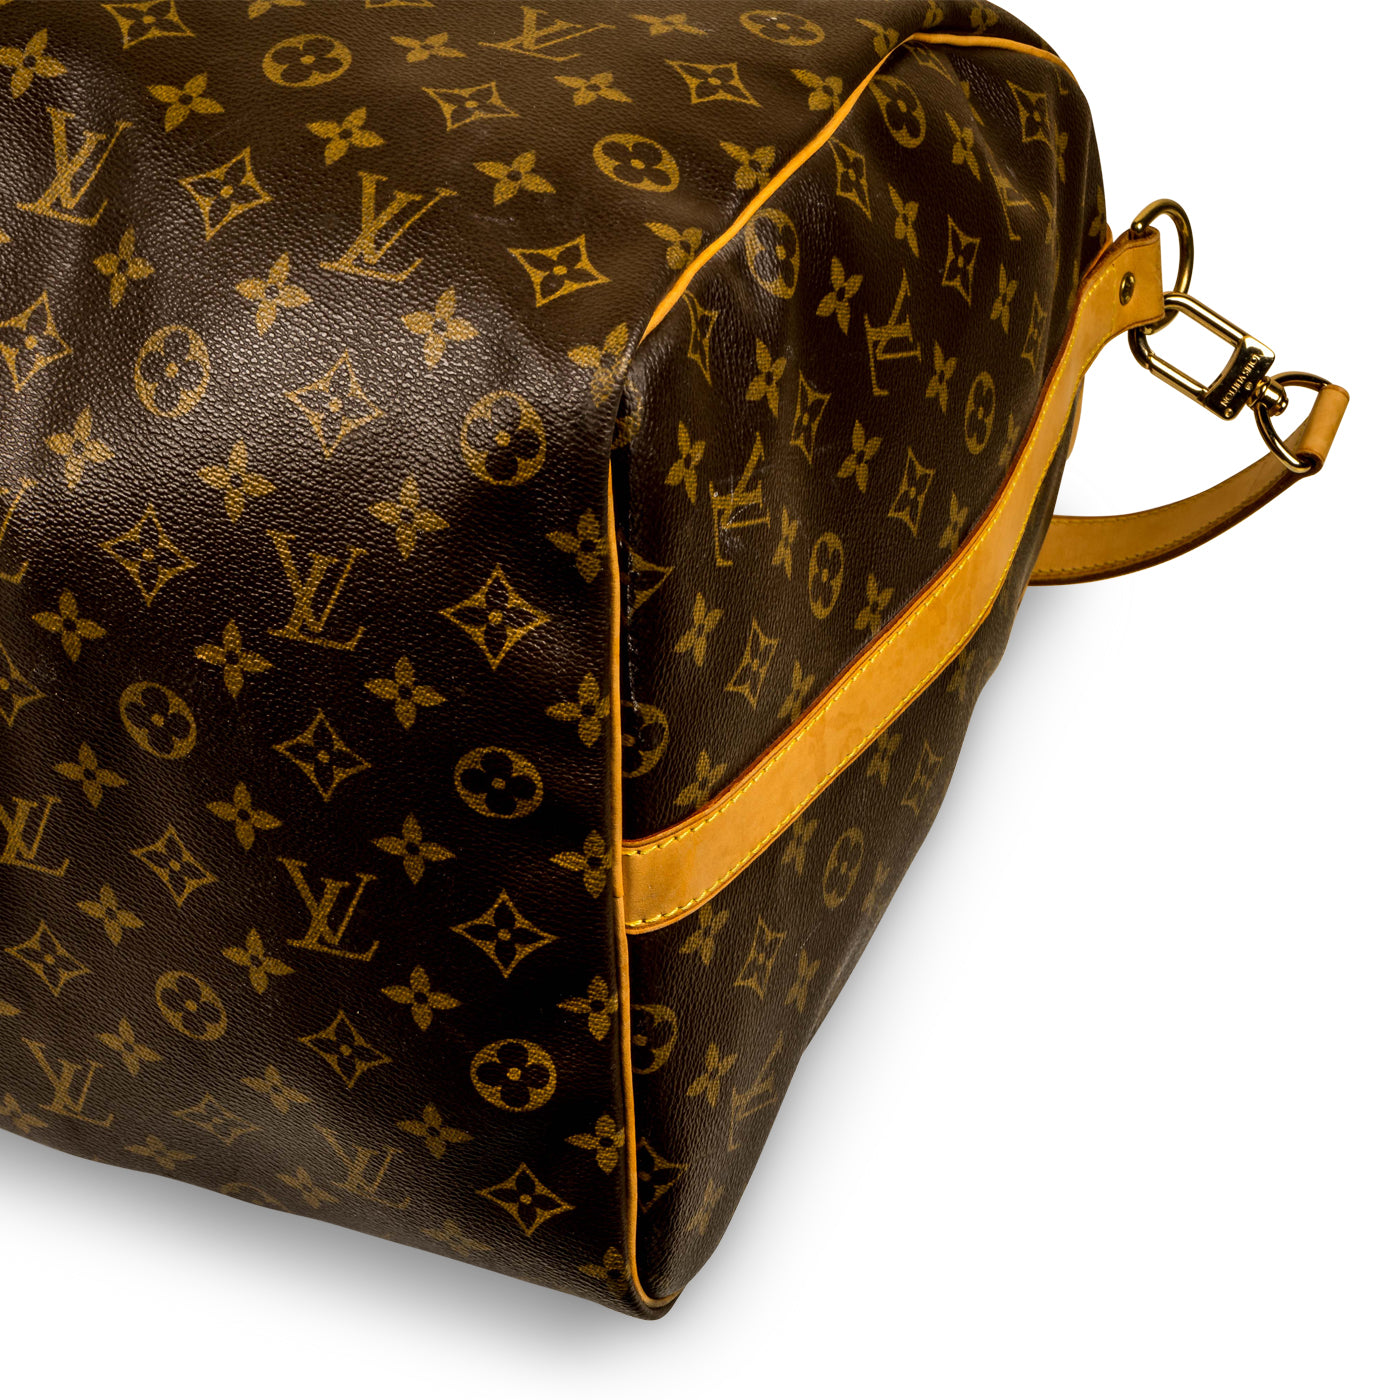 Pre-owned Authentic Louis Vuitton LV Boston Bag Keepall